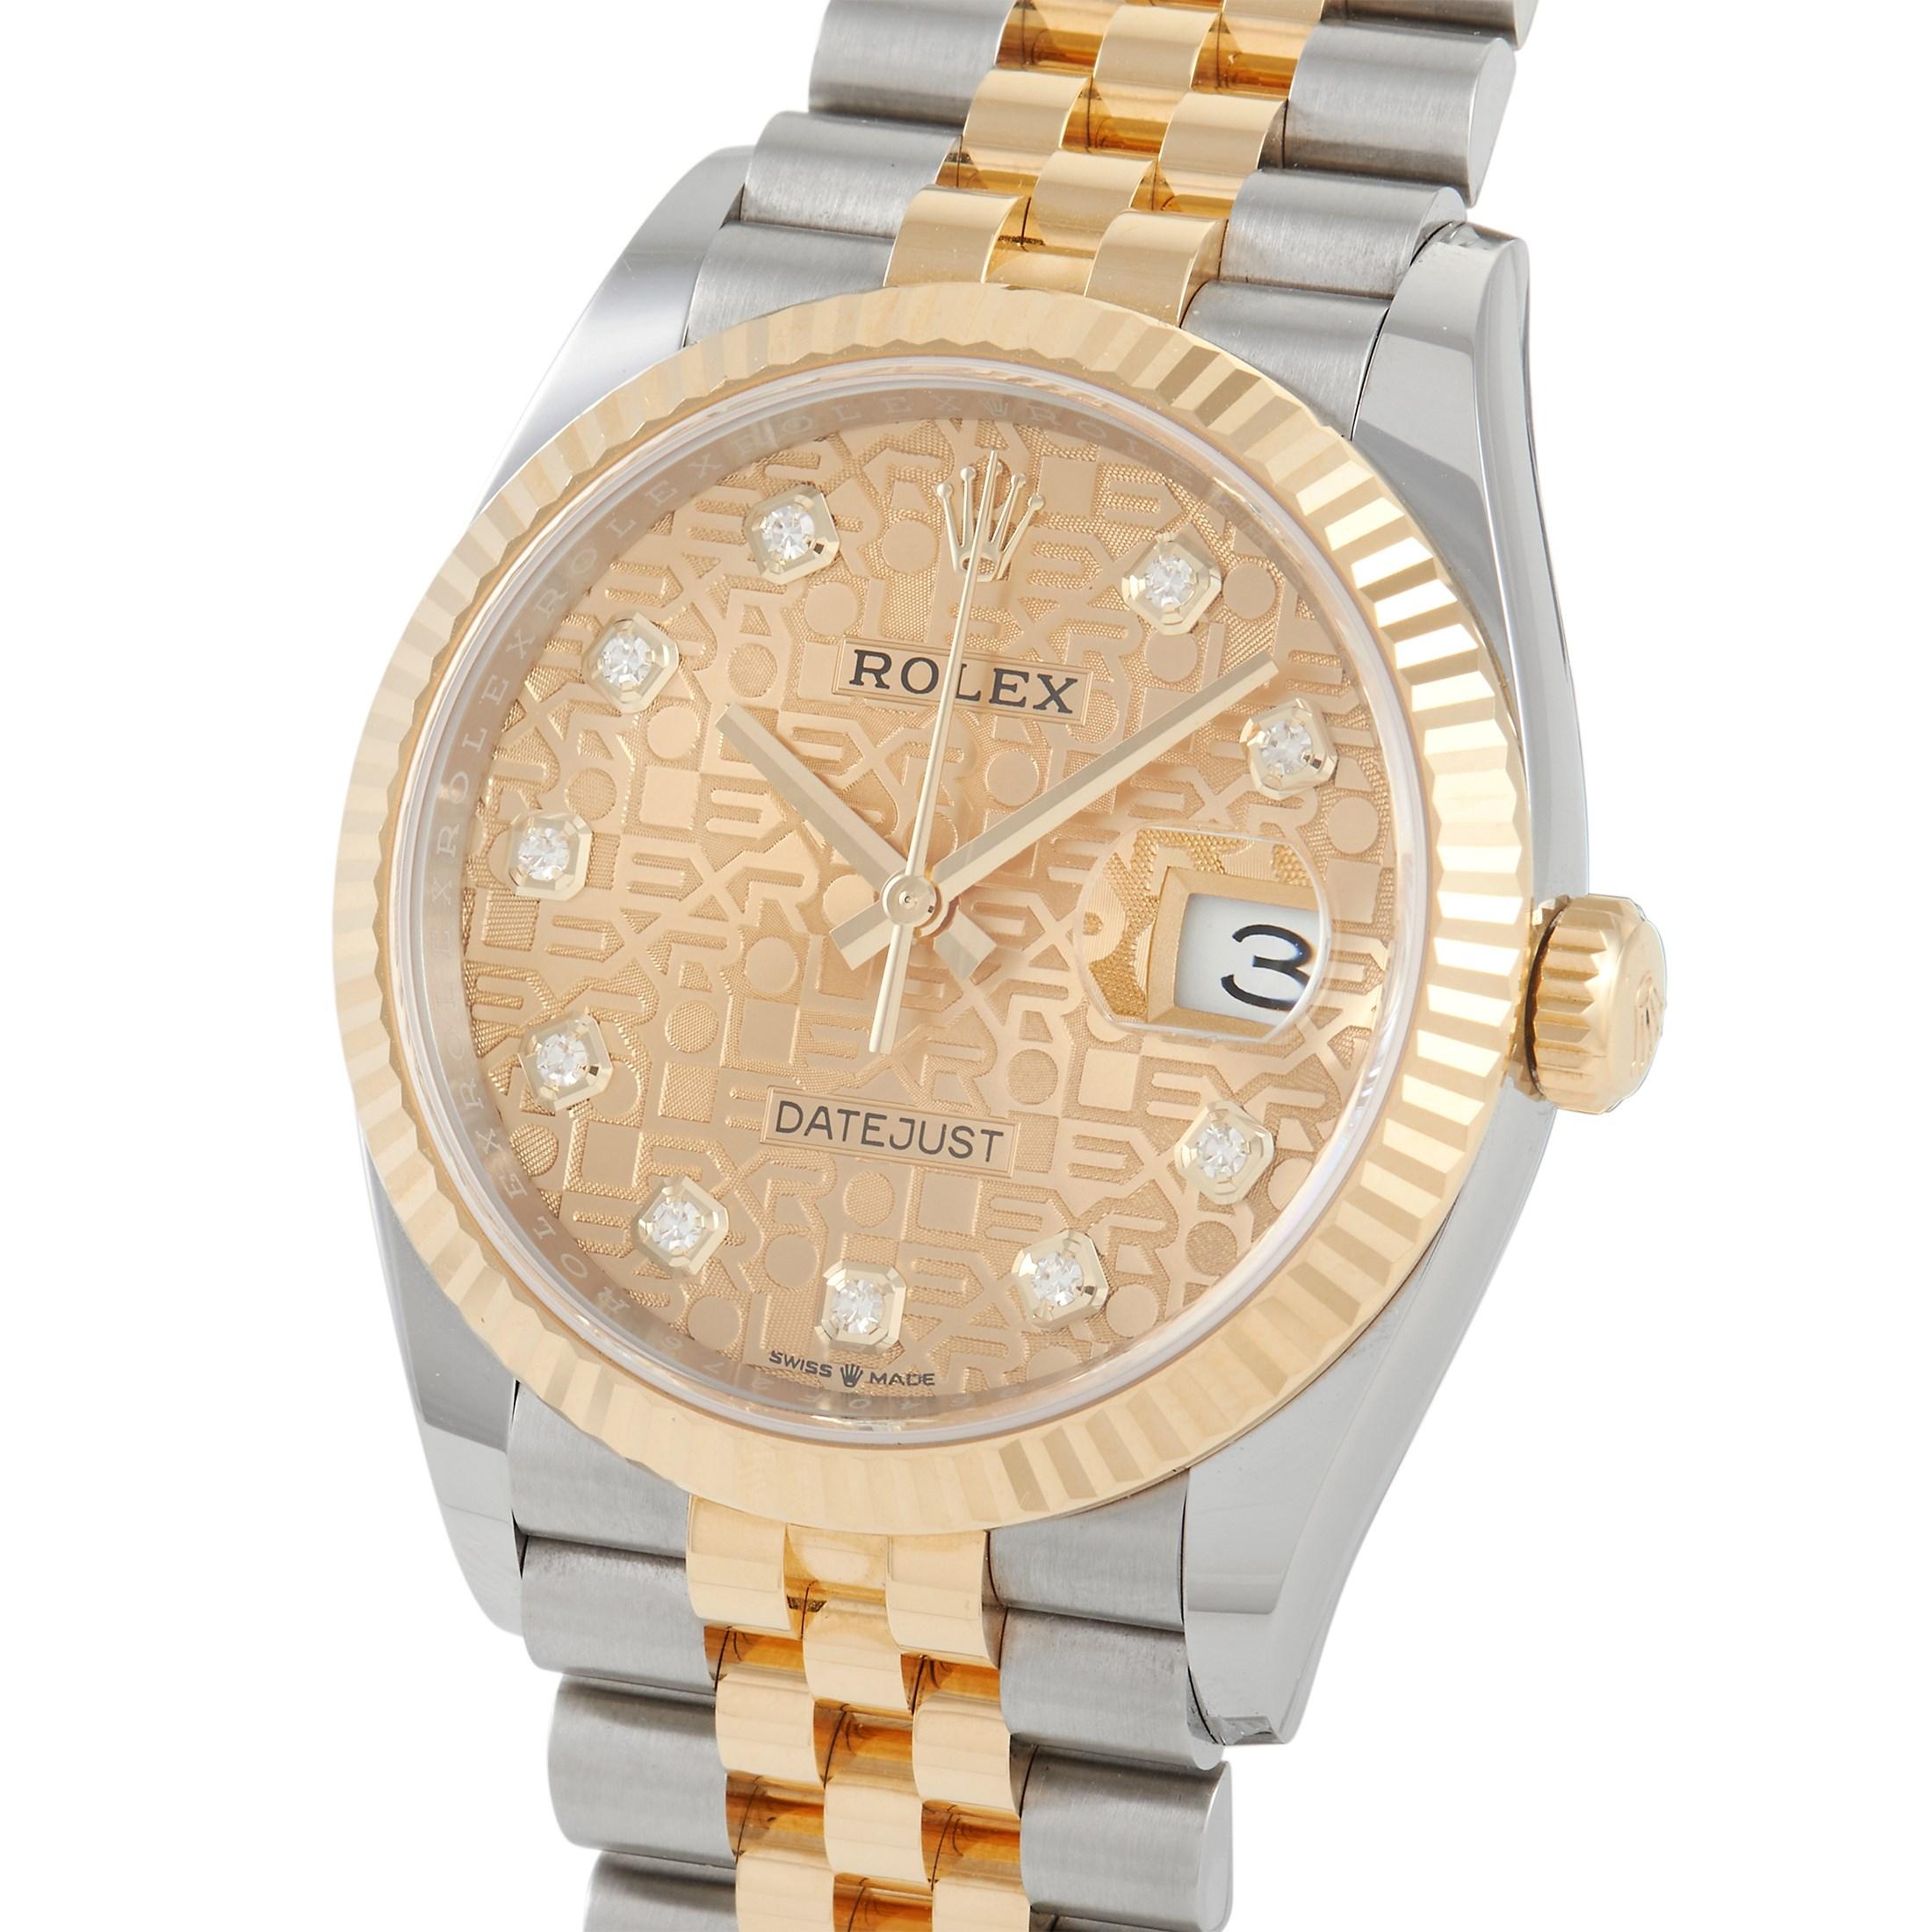 The Rolex Datejust Jubilee Diamond Watch, reference number 126233, is an exciting style that is filled with exquisite, signature touches.

This luxury timepiece features a 36mm case made from sleek Stainless Steel, which is expertly accented by a